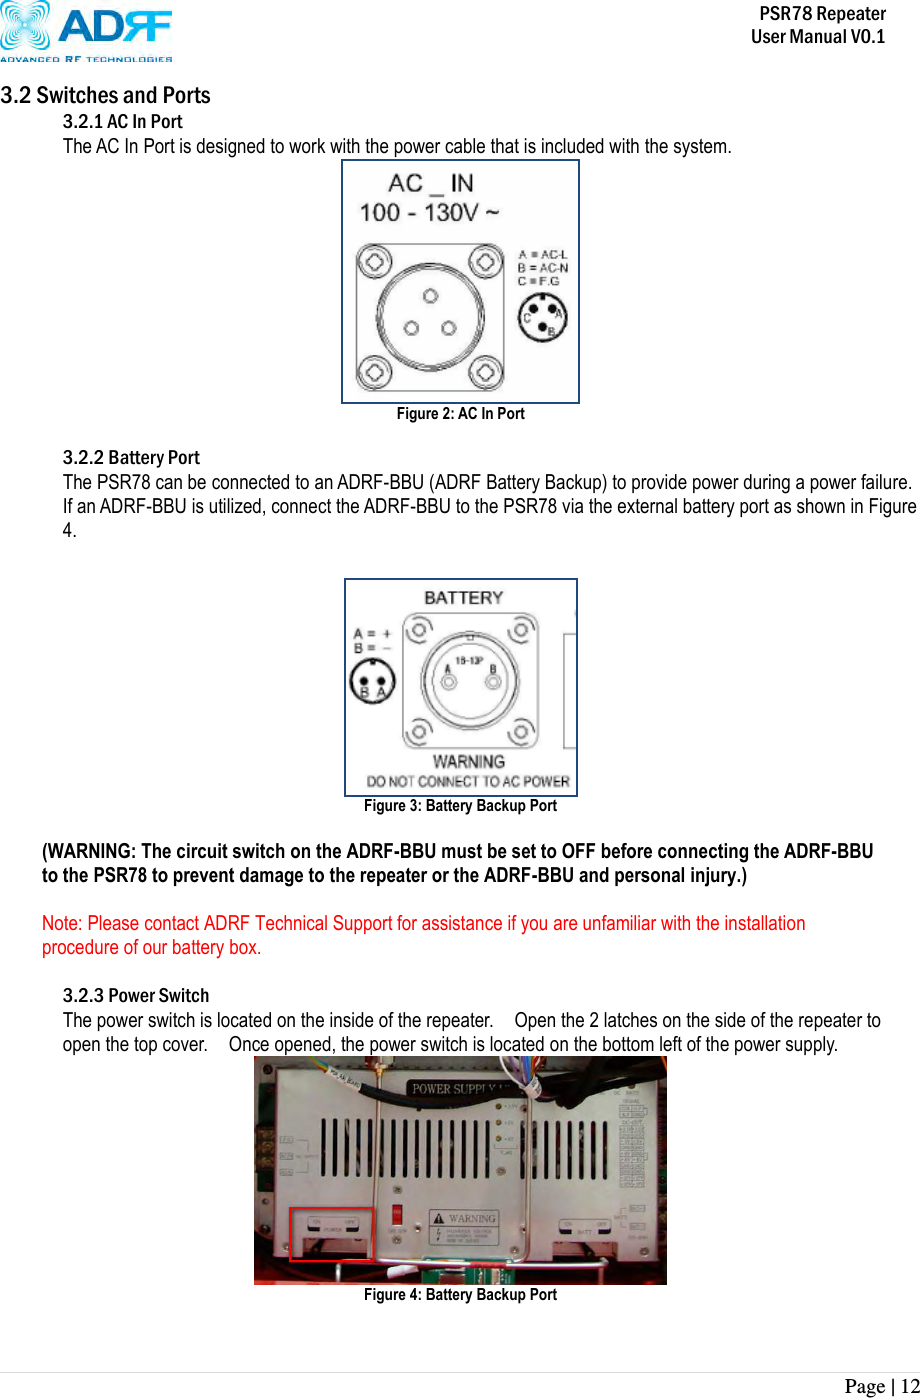           PSR78 Repeater     User Manual V0.1 Page | 12    3.2 Switches and Ports 3.2.1 AC In Port The AC In Port is designed to work with the power cable that is included with the system.      Figure 2: AC In Port    3.2.2 Battery Port The PSR78 can be connected to an ADRF-BBU (ADRF Battery Backup) to provide power during a power failure.  If an ADRF-BBU is utilized, connect the ADRF-BBU to the PSR78 via the external battery port as shown in Figure 4.    Figure 3: Battery Backup Port    (WARNING: The circuit switch on the ADRF-BBU must be set to OFF before connecting the ADRF-BBU to the PSR78 to prevent damage to the repeater or the ADRF-BBU and personal injury.)  Note: Please contact ADRF Technical Support for assistance if you are unfamiliar with the installation procedure of our battery box.  3.2.3 Power Switch The power switch is located on the inside of the repeater.    Open the 2 latches on the side of the repeater to open the top cover.    Once opened, the power switch is located on the bottom left of the power supply.  Figure 4: Battery Backup Port 